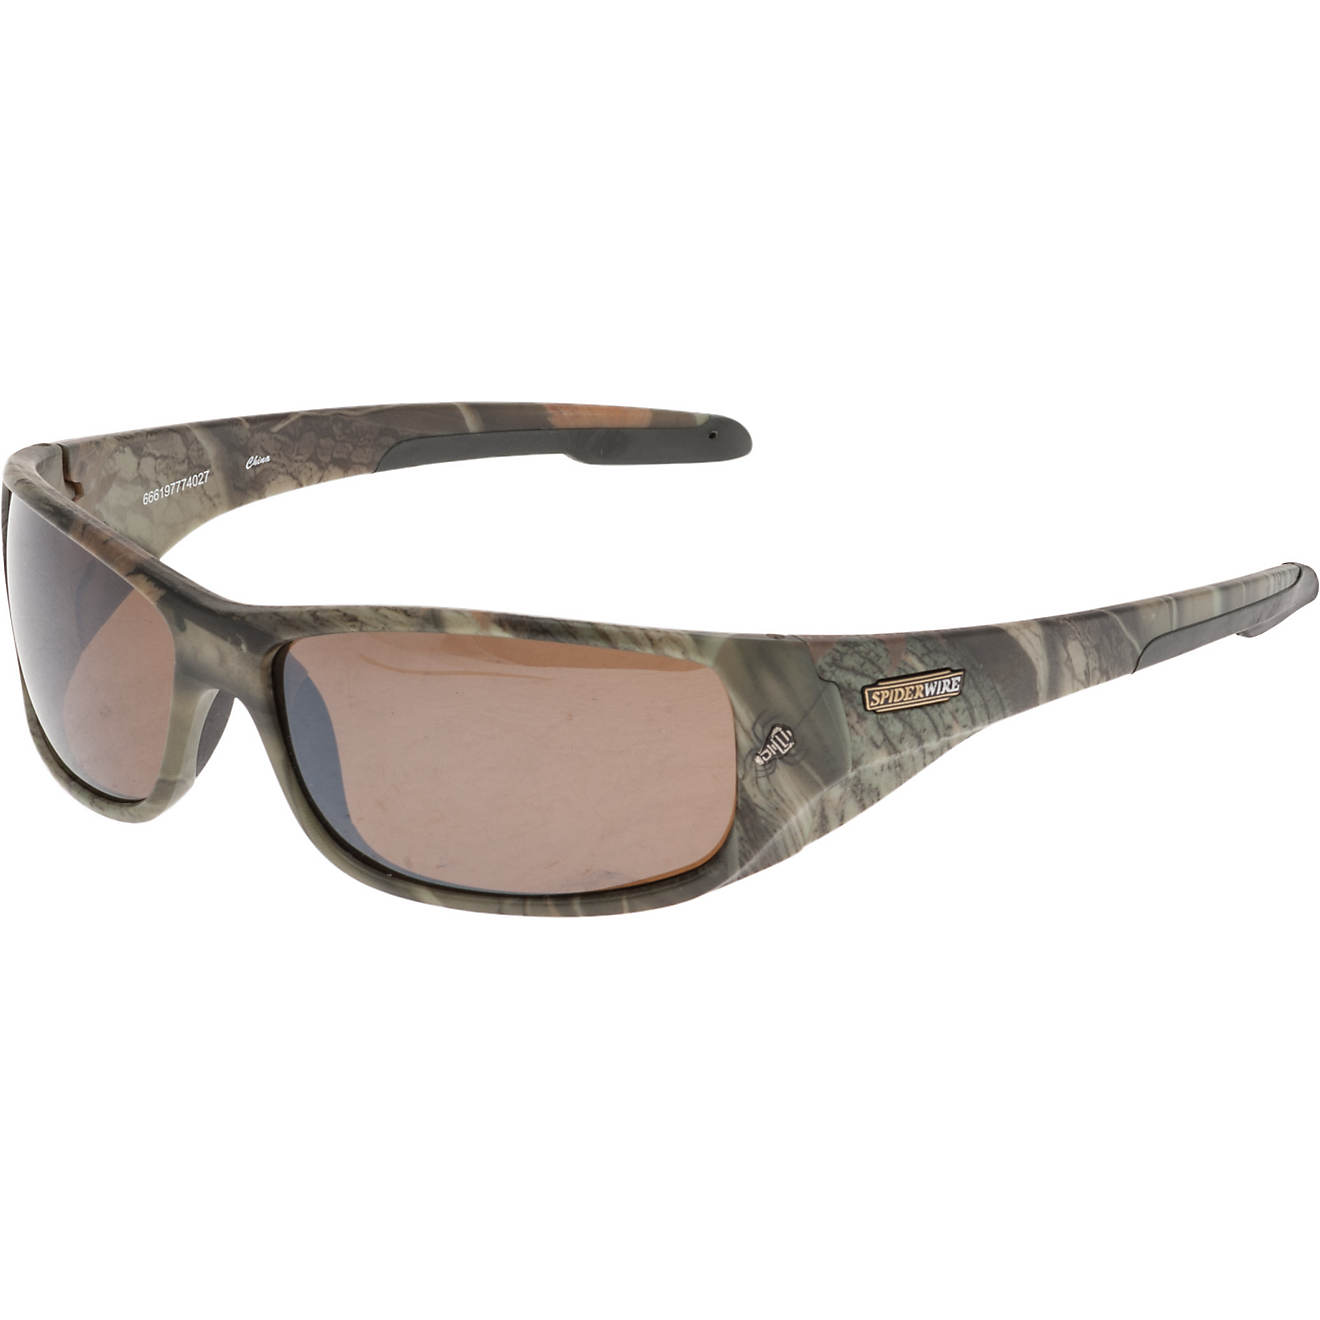 Spiderwire® Men's Fishing Sunglasses                                                                                            - view number 1